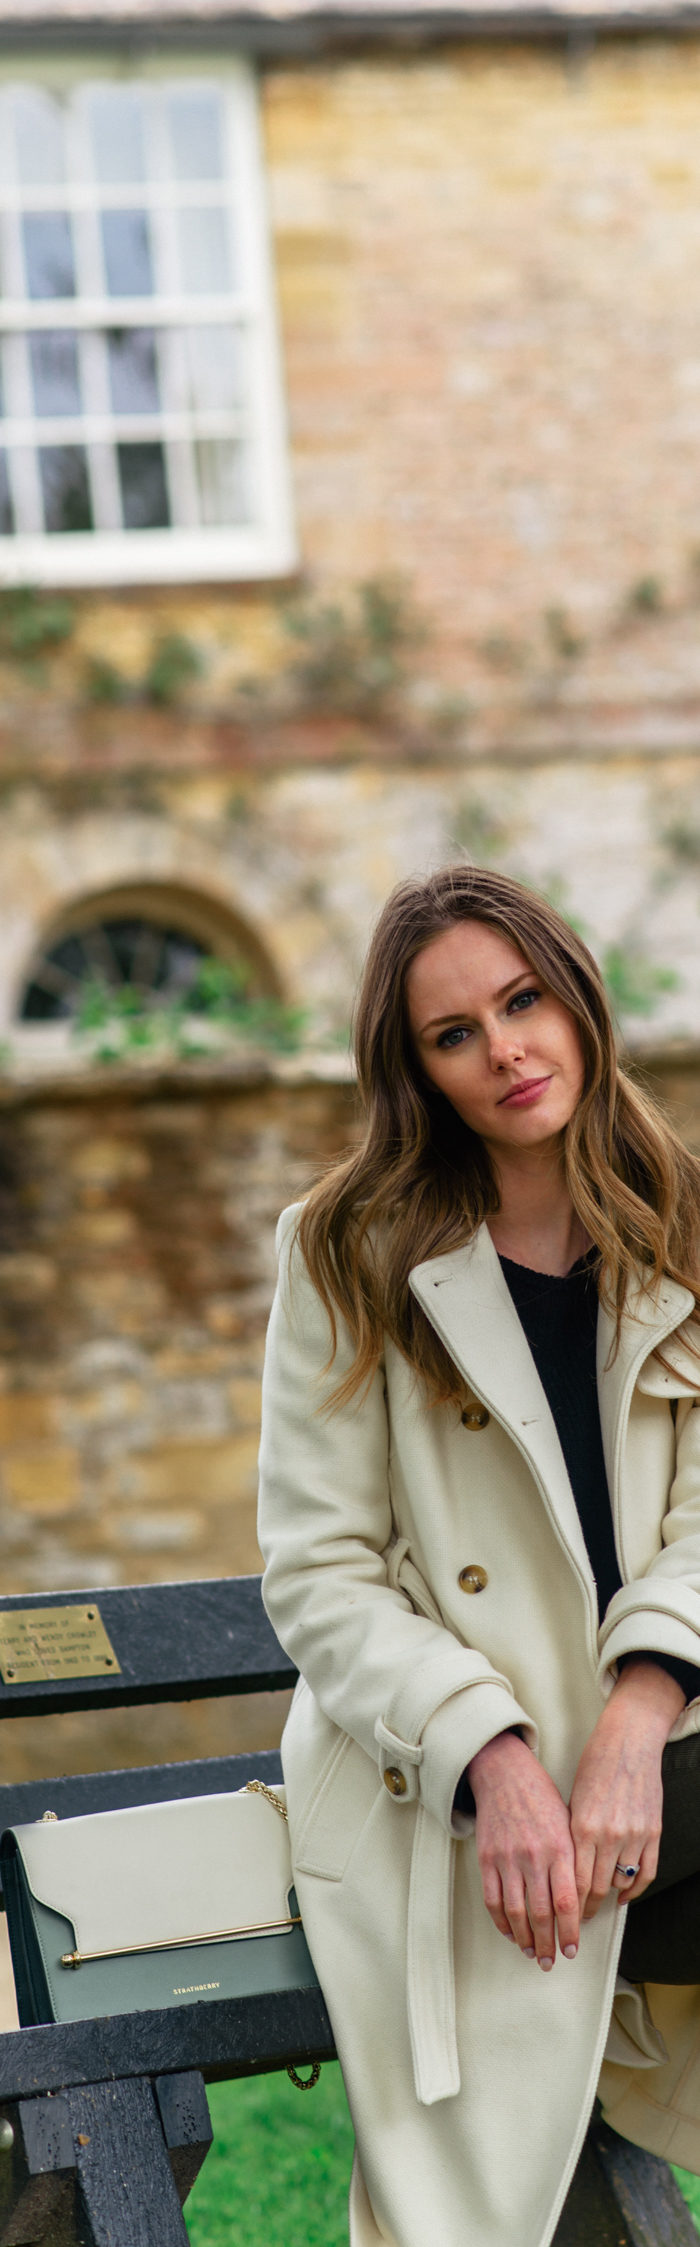 Alyssa Campanella of The A List blog visits Downton Abbey locations in Bampton wearing RED Valentino Armurè trench coat and Strathberry East West bag